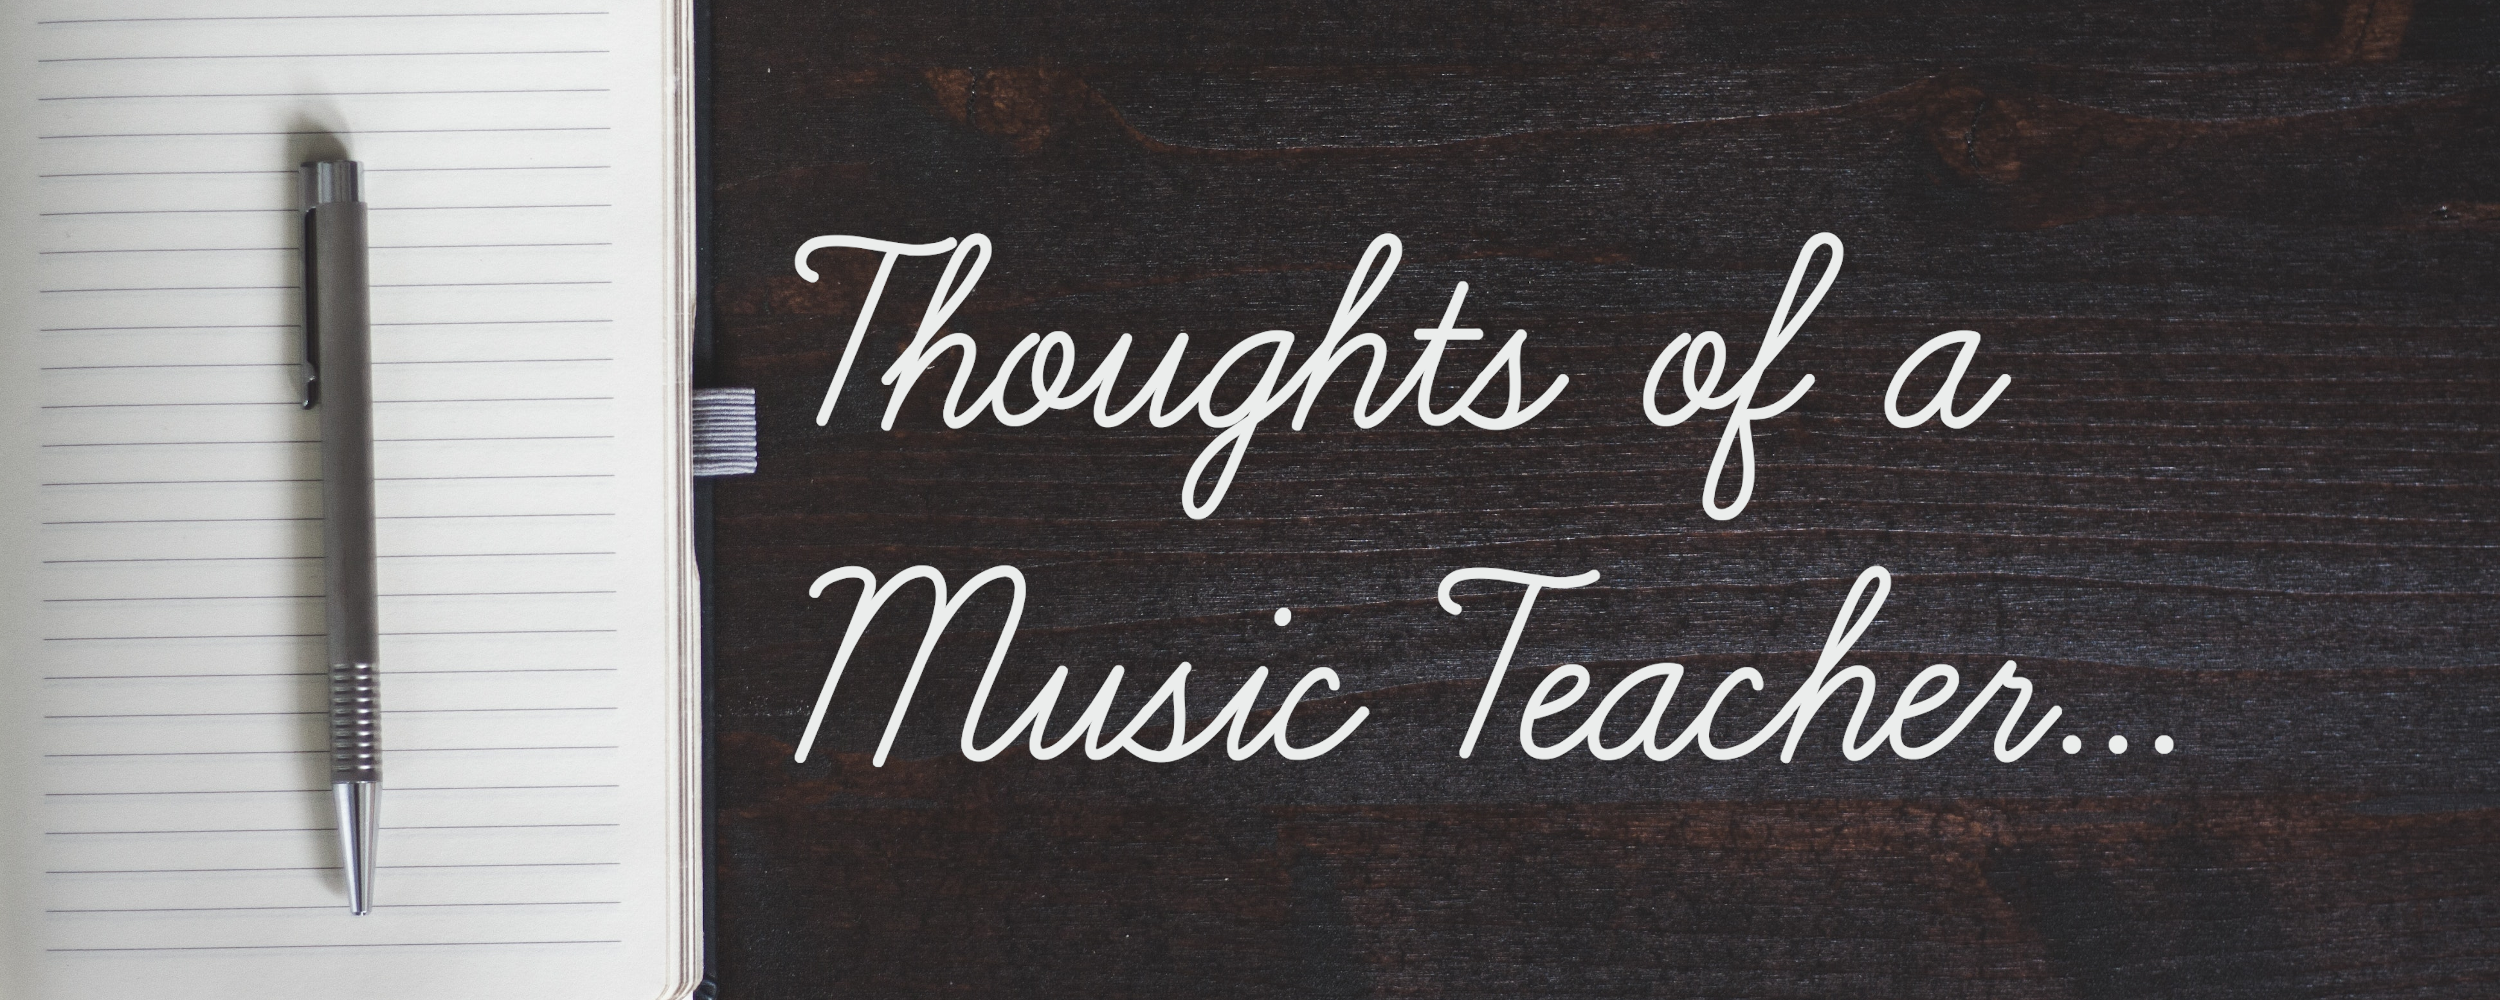 Thoughts Of A Music Teacher: Life during Covid-19